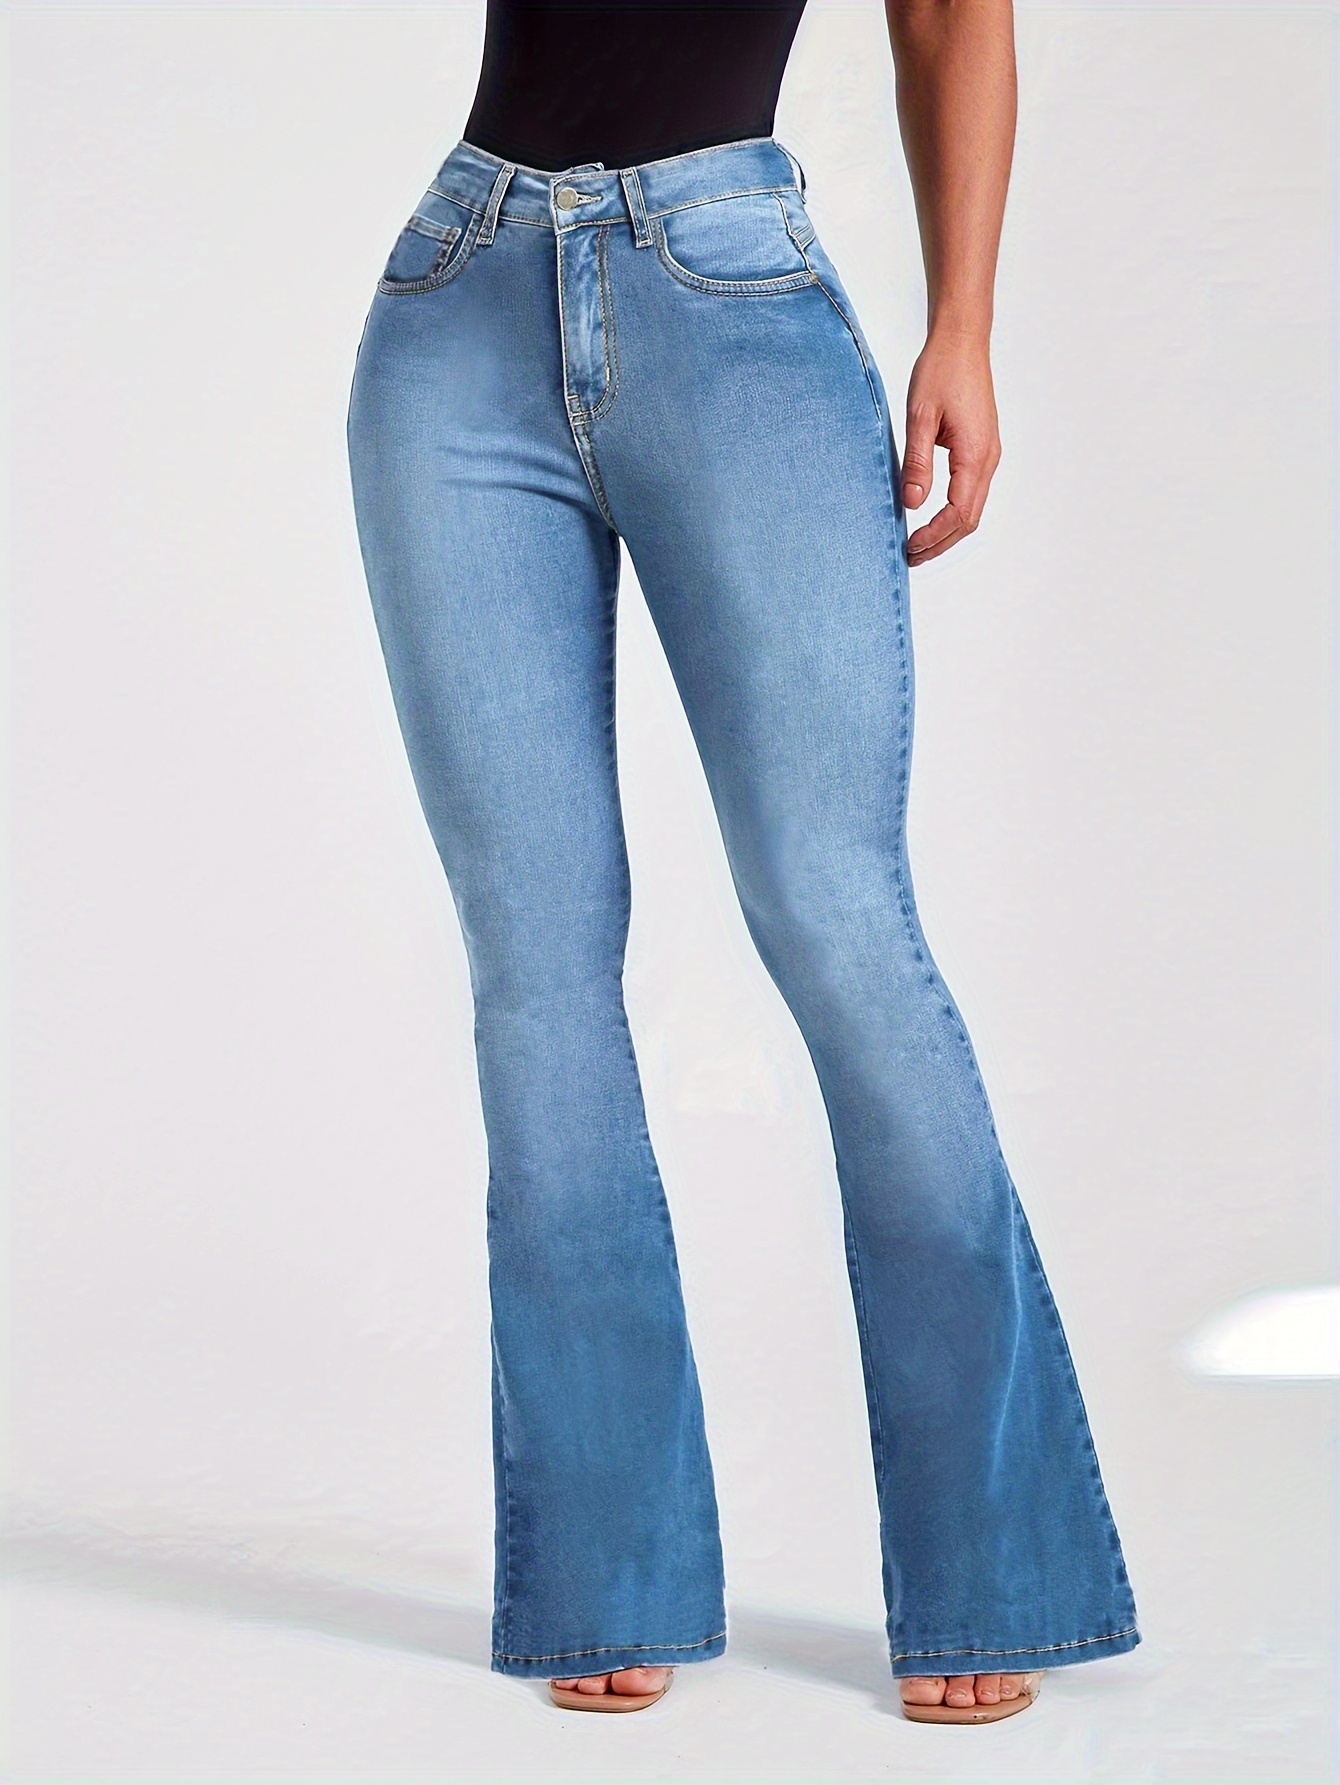 Stretchy High-Rise Skinny Bell Bottoms, Dark Wash Flared Boot Cut Jean  Pants, Women's Clothing & Denim